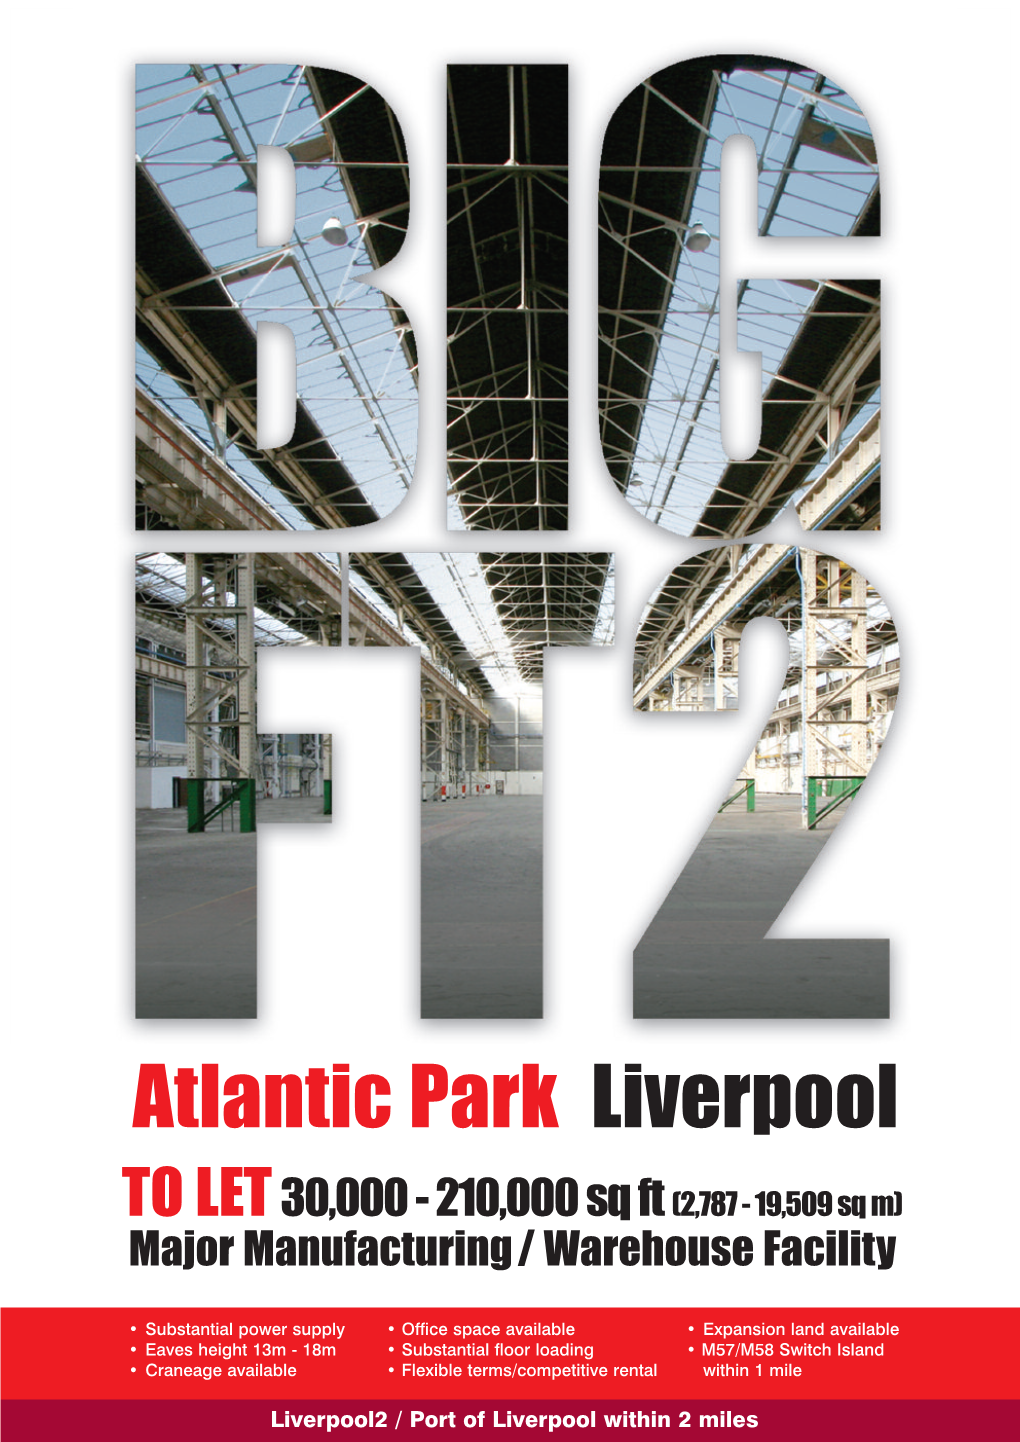 Atlantic Park Liverpool to LET 30,000 - 210,000 Sq Ft (2,787 - 19,509 Sq M) Major Manufacturin G/ Warehouse Facility